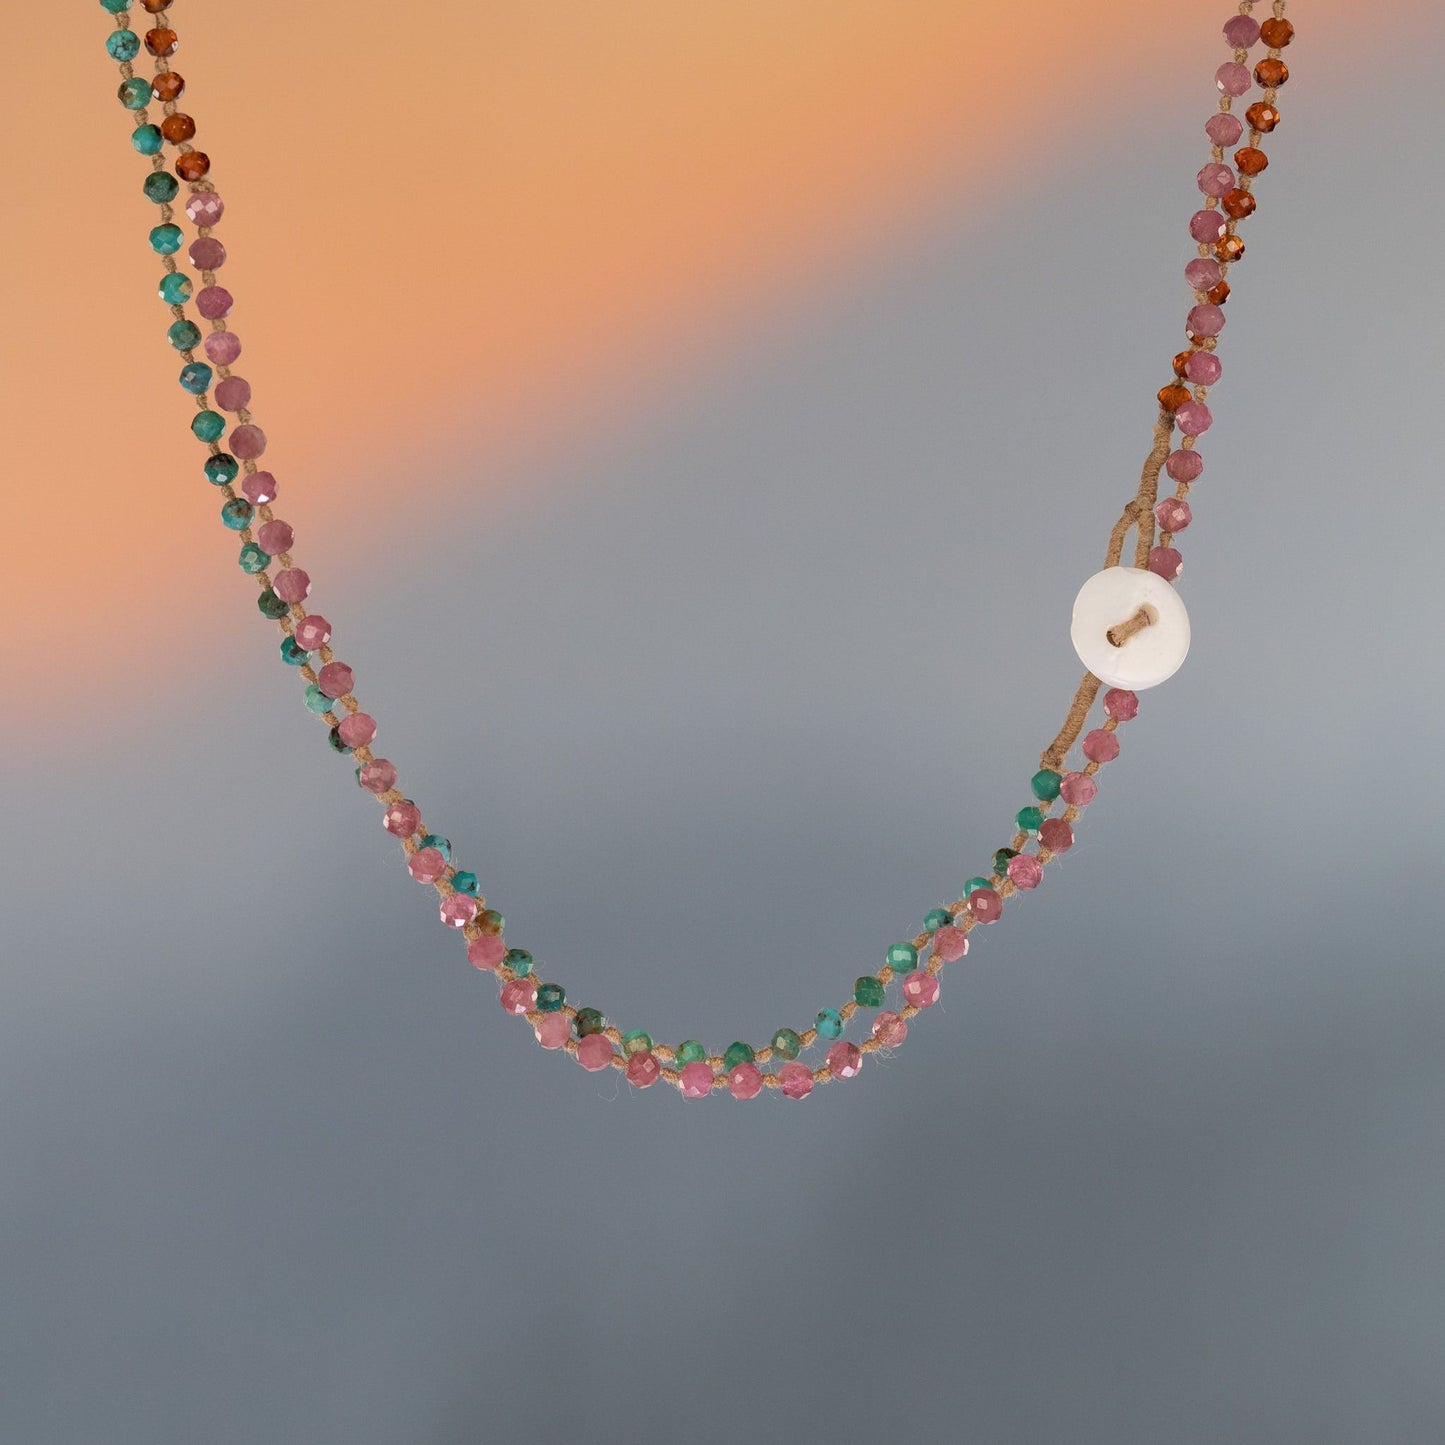 Turquoise, Pink Tourmaline and Hessonite Button Closure Necklace 32"